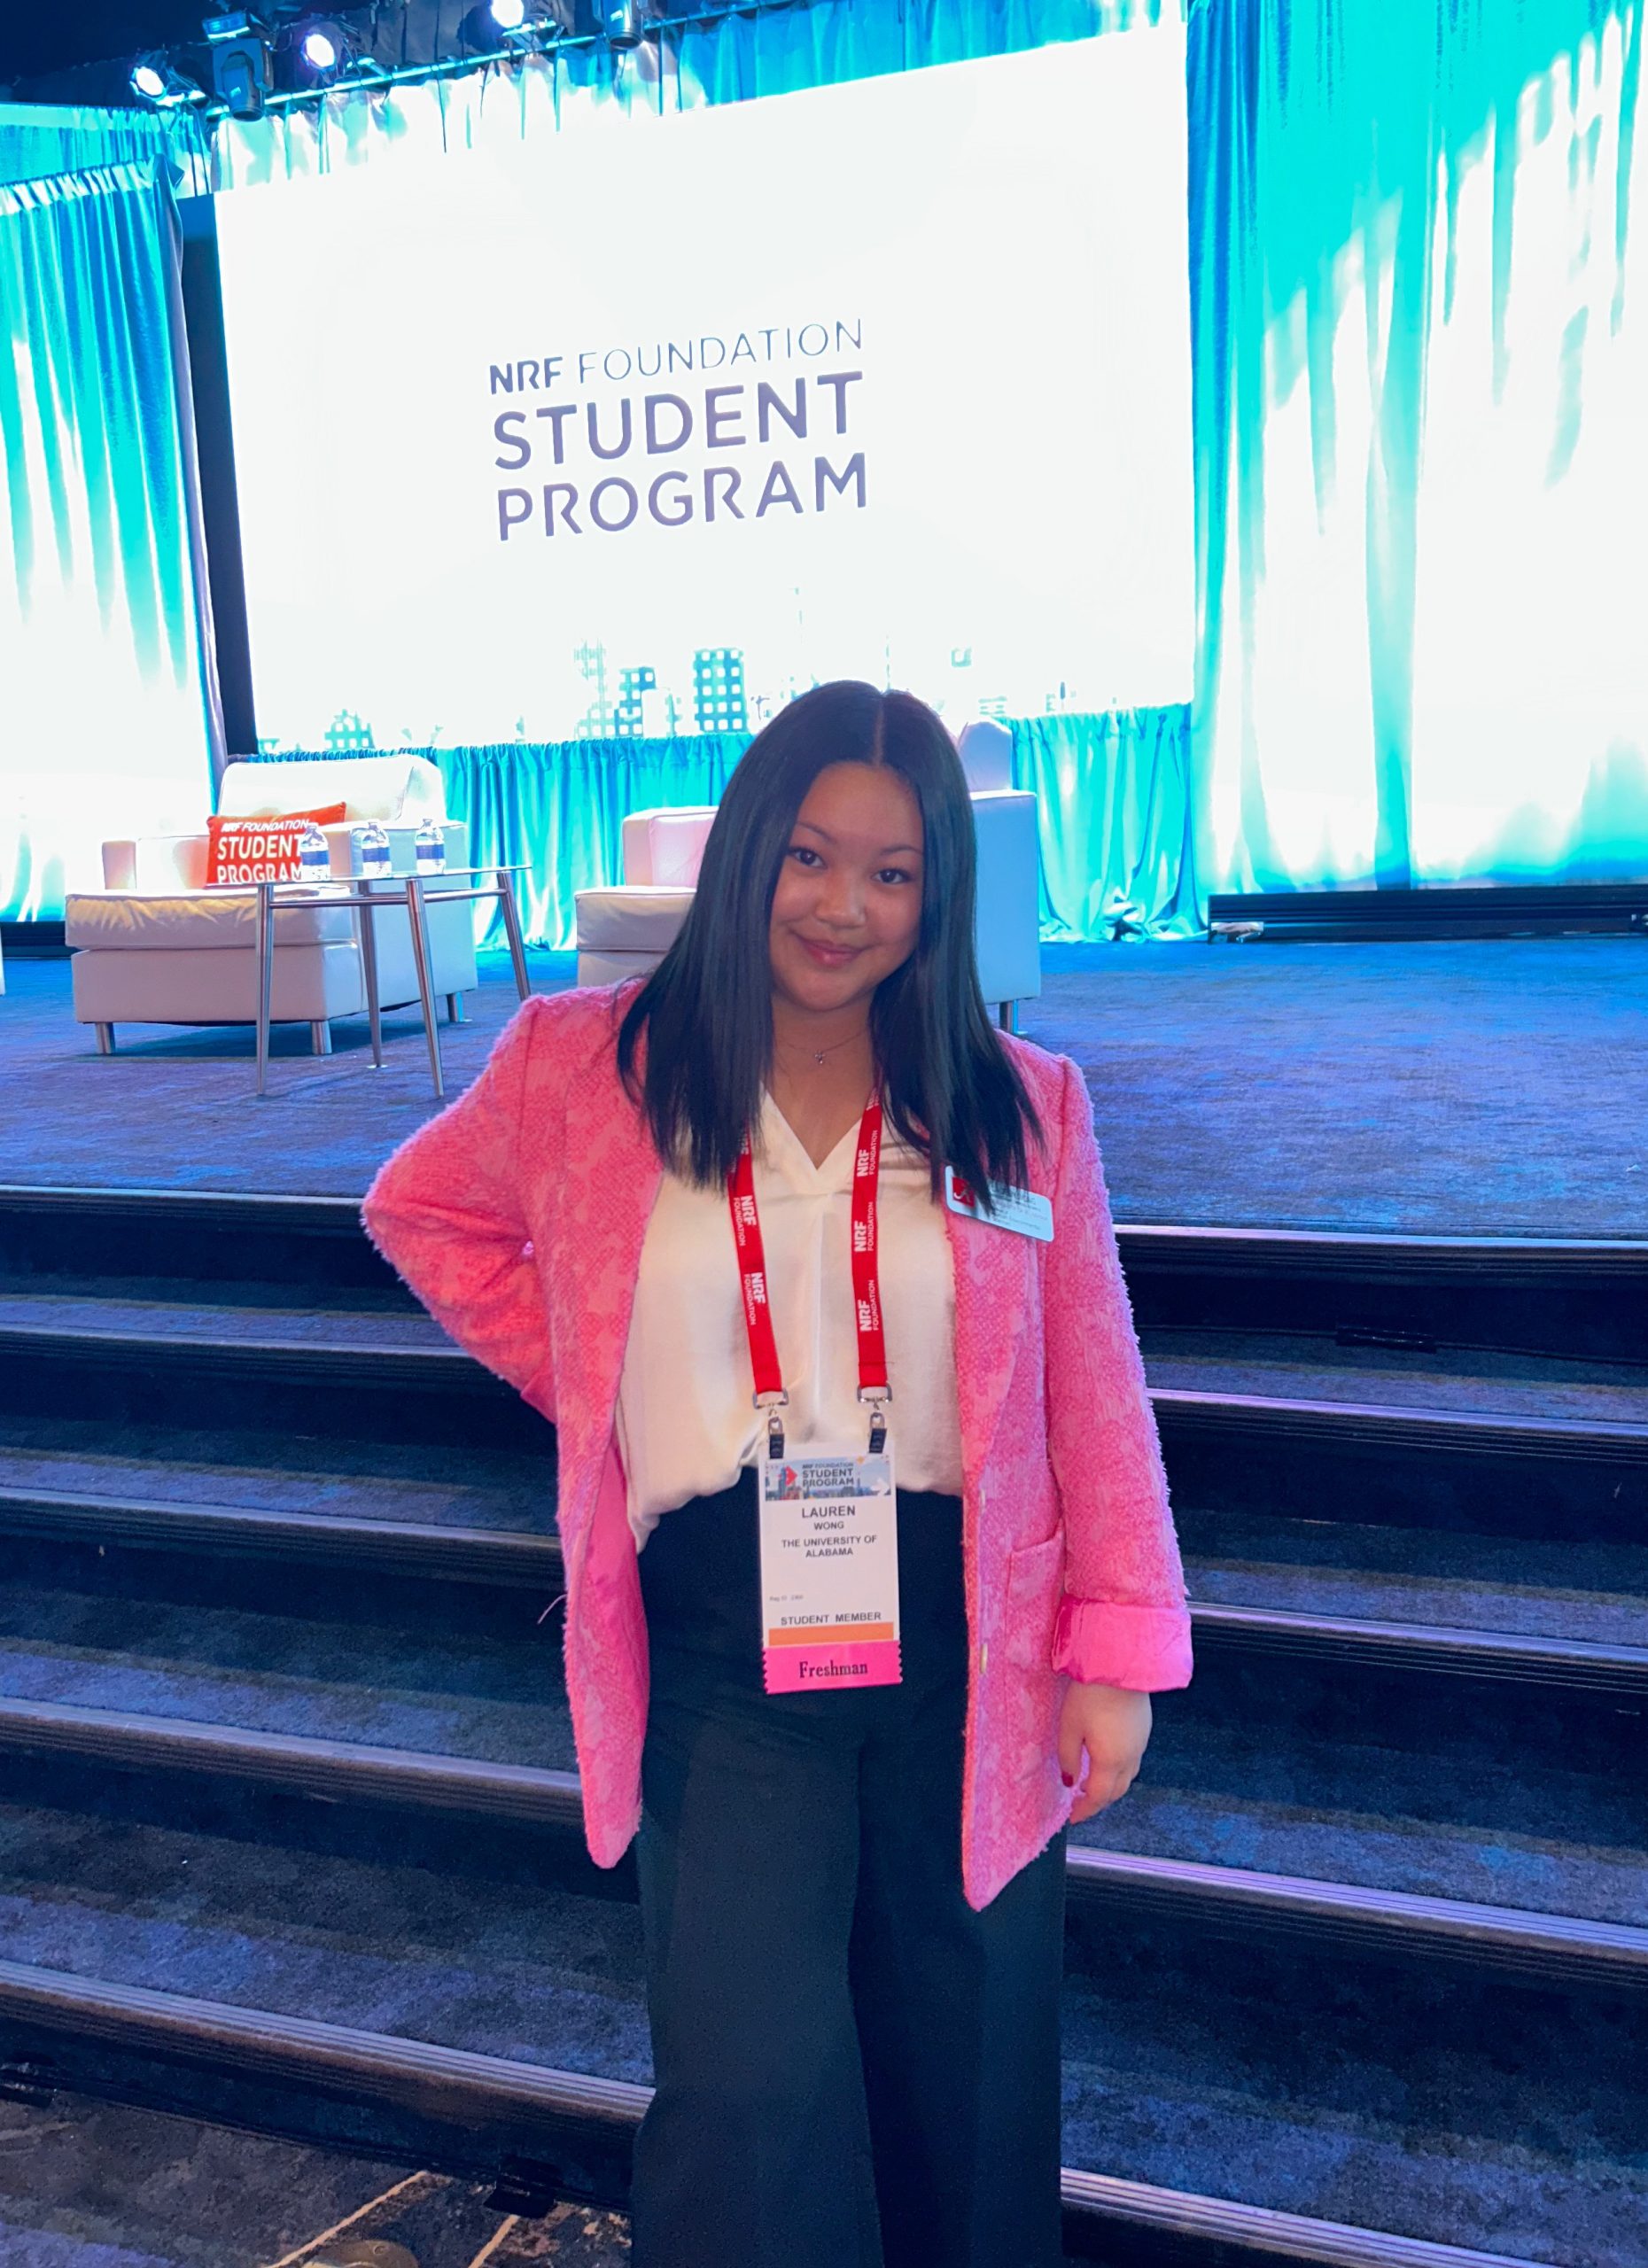 Student in pink jacket at a conference